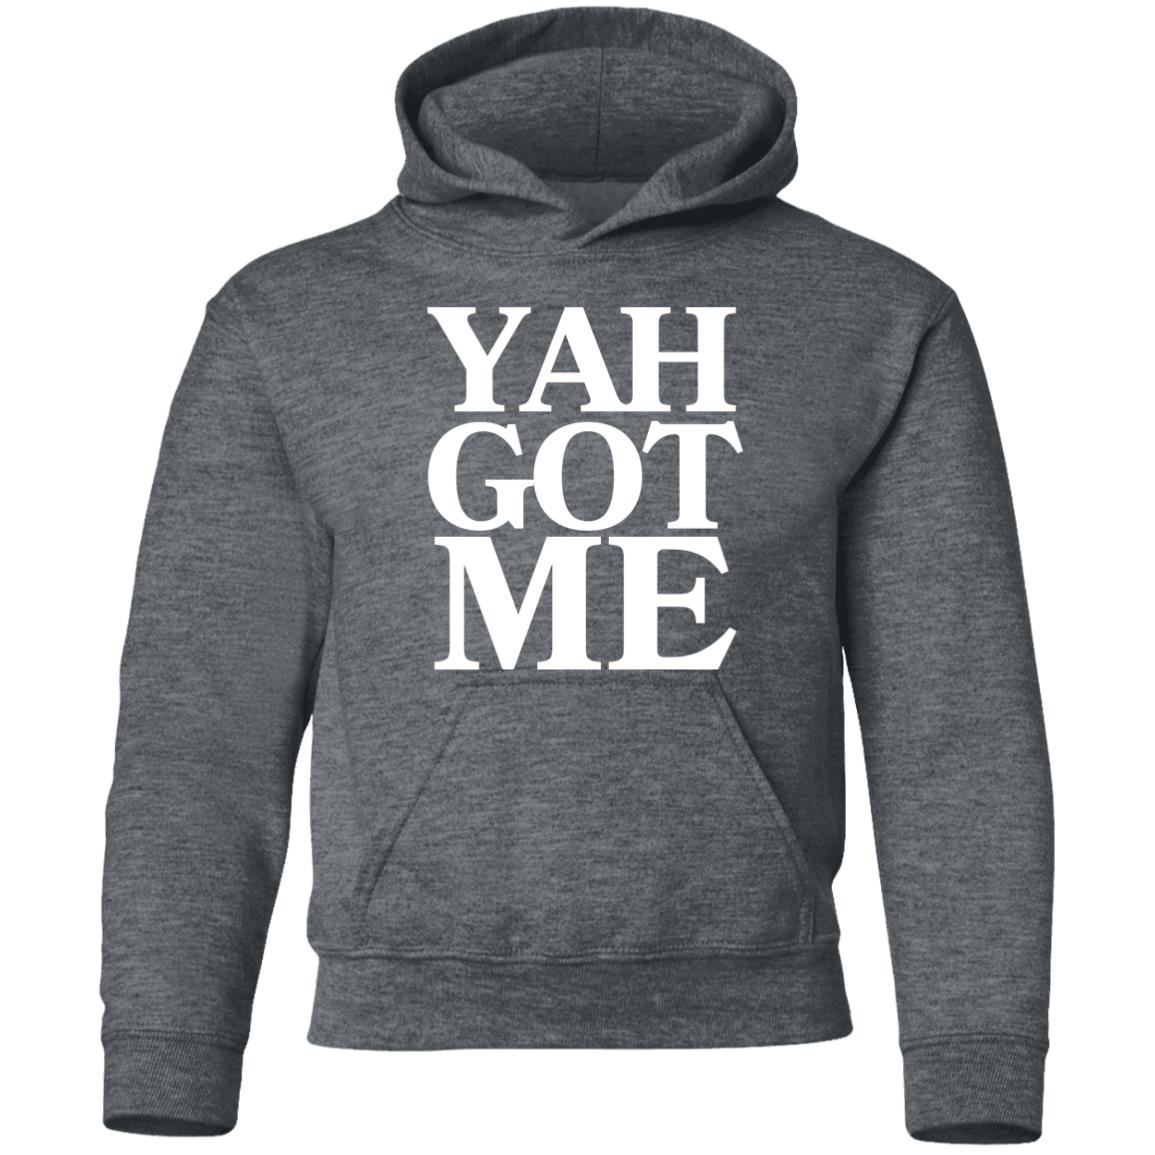 YAH GOT ME Youth Pullover Hoodie